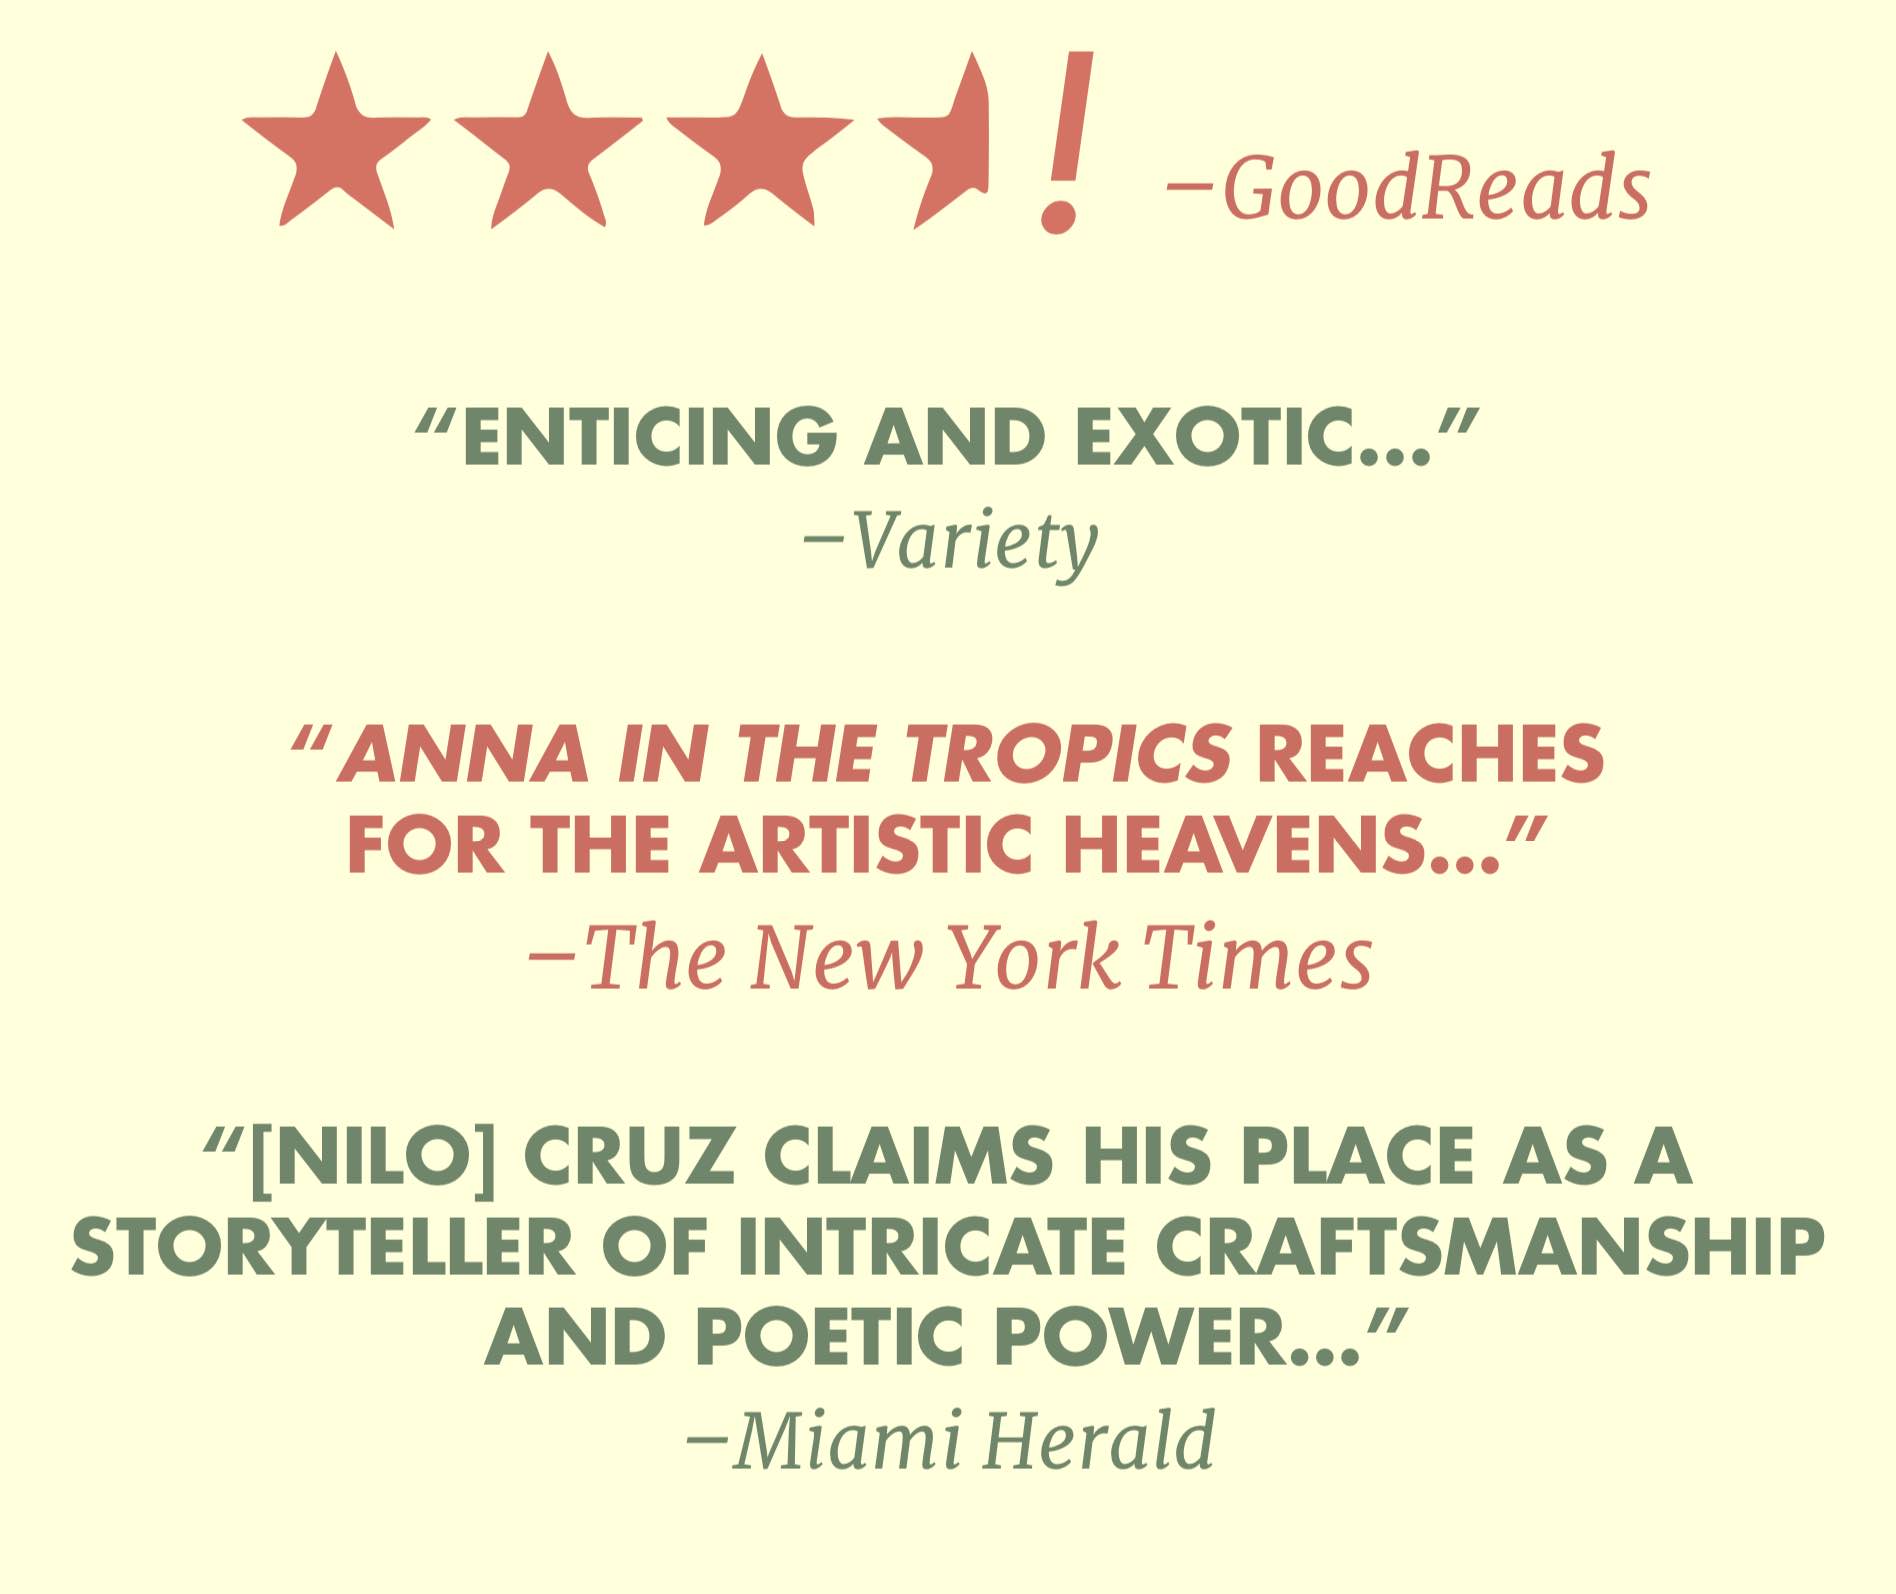 3 and a half Stars - Good Reads, "Enticing and Exotic..." Variety, "Anna in the Tropics reaches for the Artistic Heavens.." The New York Times, "Nilo Cruz Claims his place as a storyteller of intricate craftsmanship and poetic power..." Miami Herald